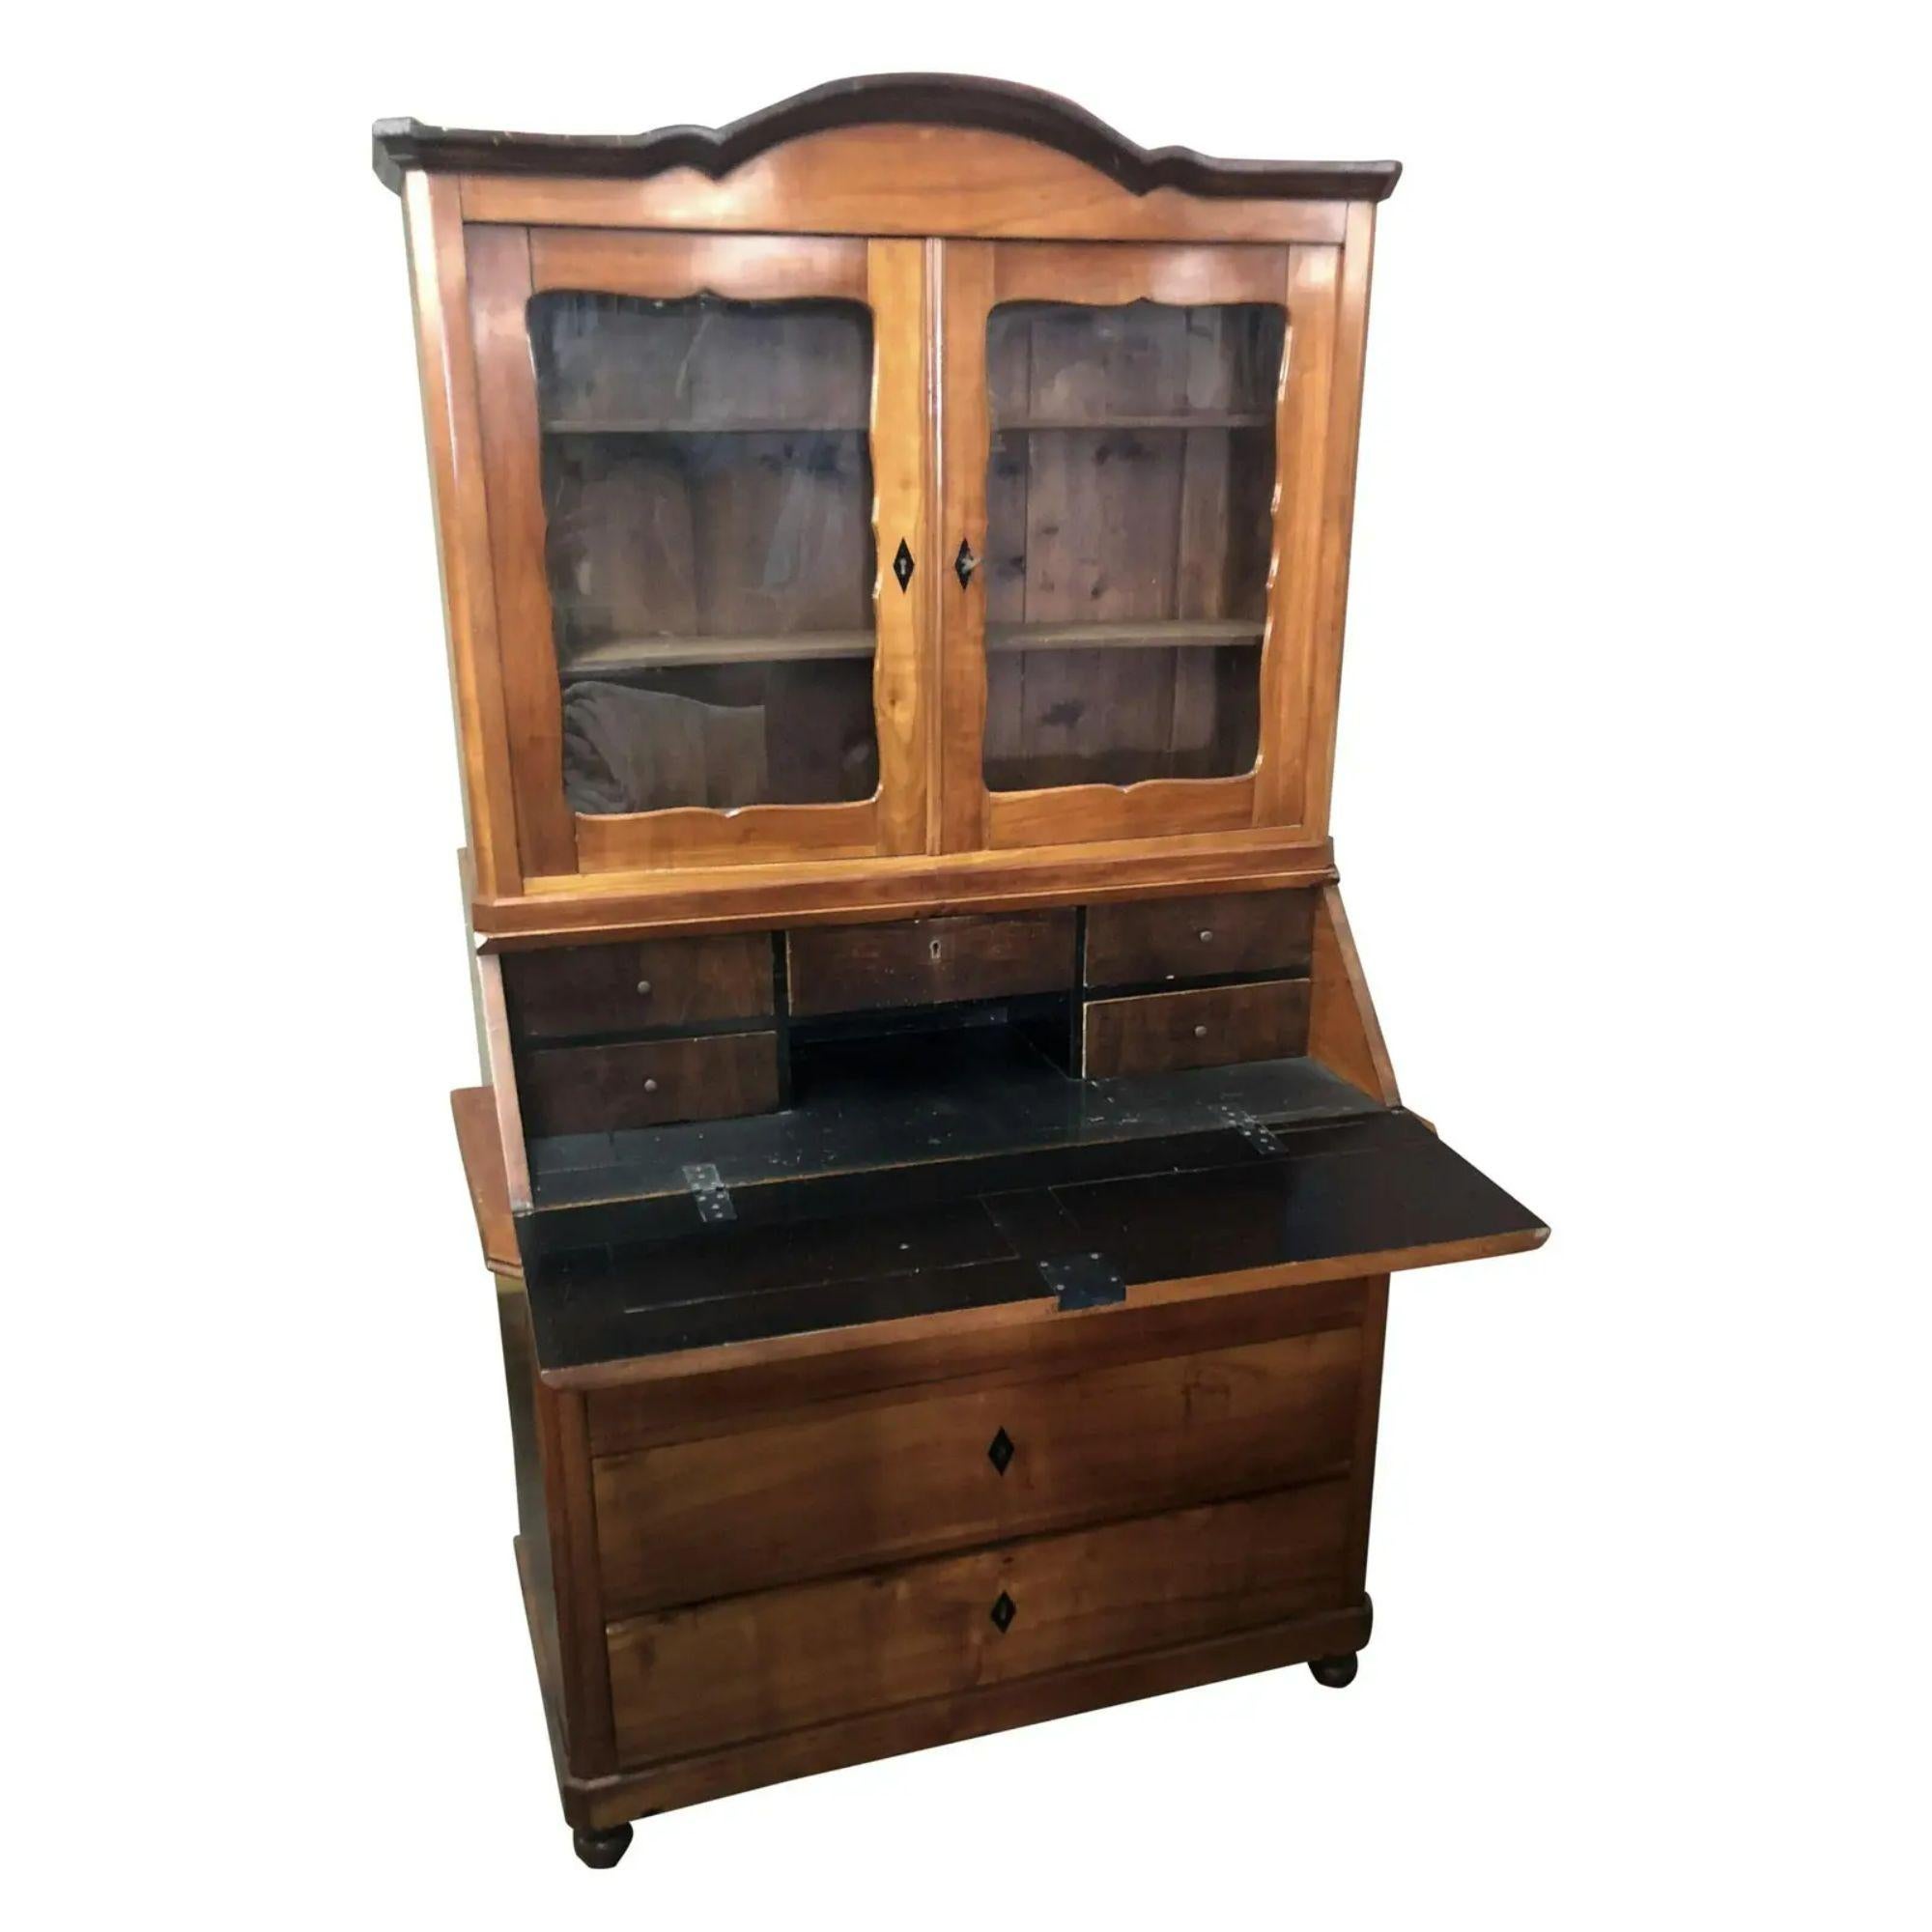 Antique Early 19th Century Biedermeier Austrian Country secretary bookcase desk

Additional information:
Materials: Fruitwood
Color: Sienna
Period: Early 19th Century
Styles: Biedermeier
Table Shape: Rectangle
Item Type: Vintage, Antique or